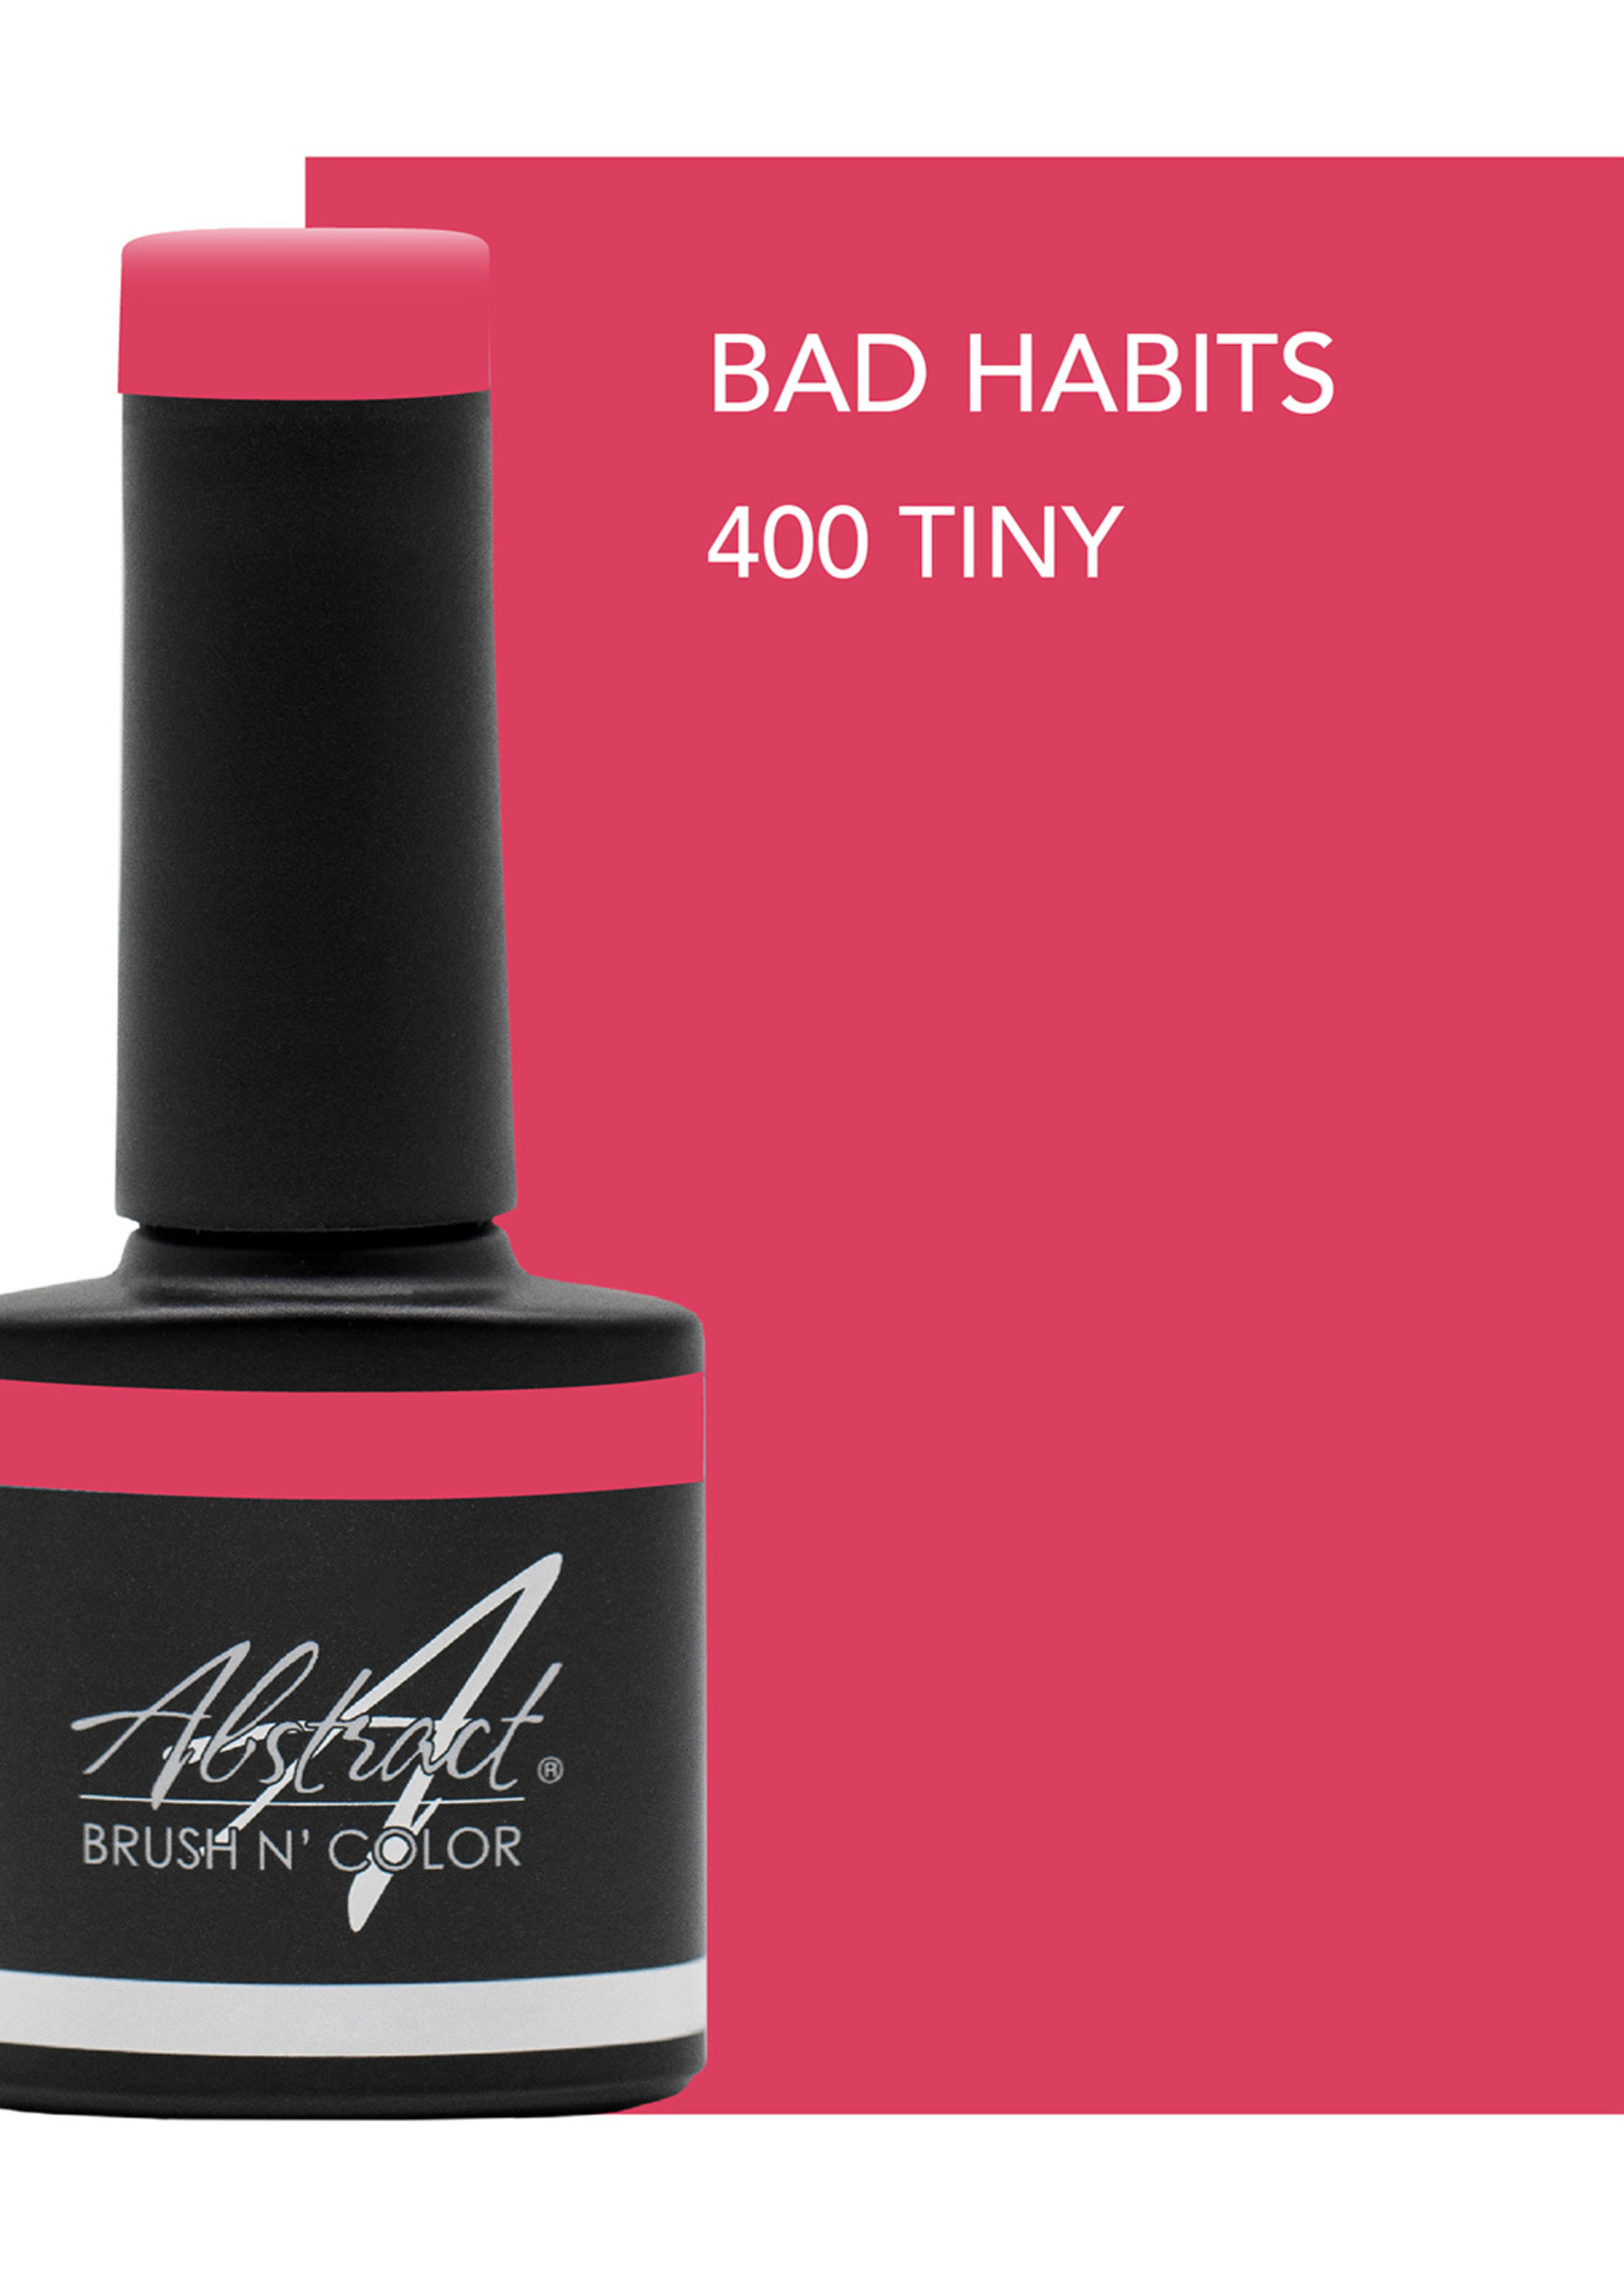 Abstract® Brush N' Color Tiny 7.5 ml Bad Habits